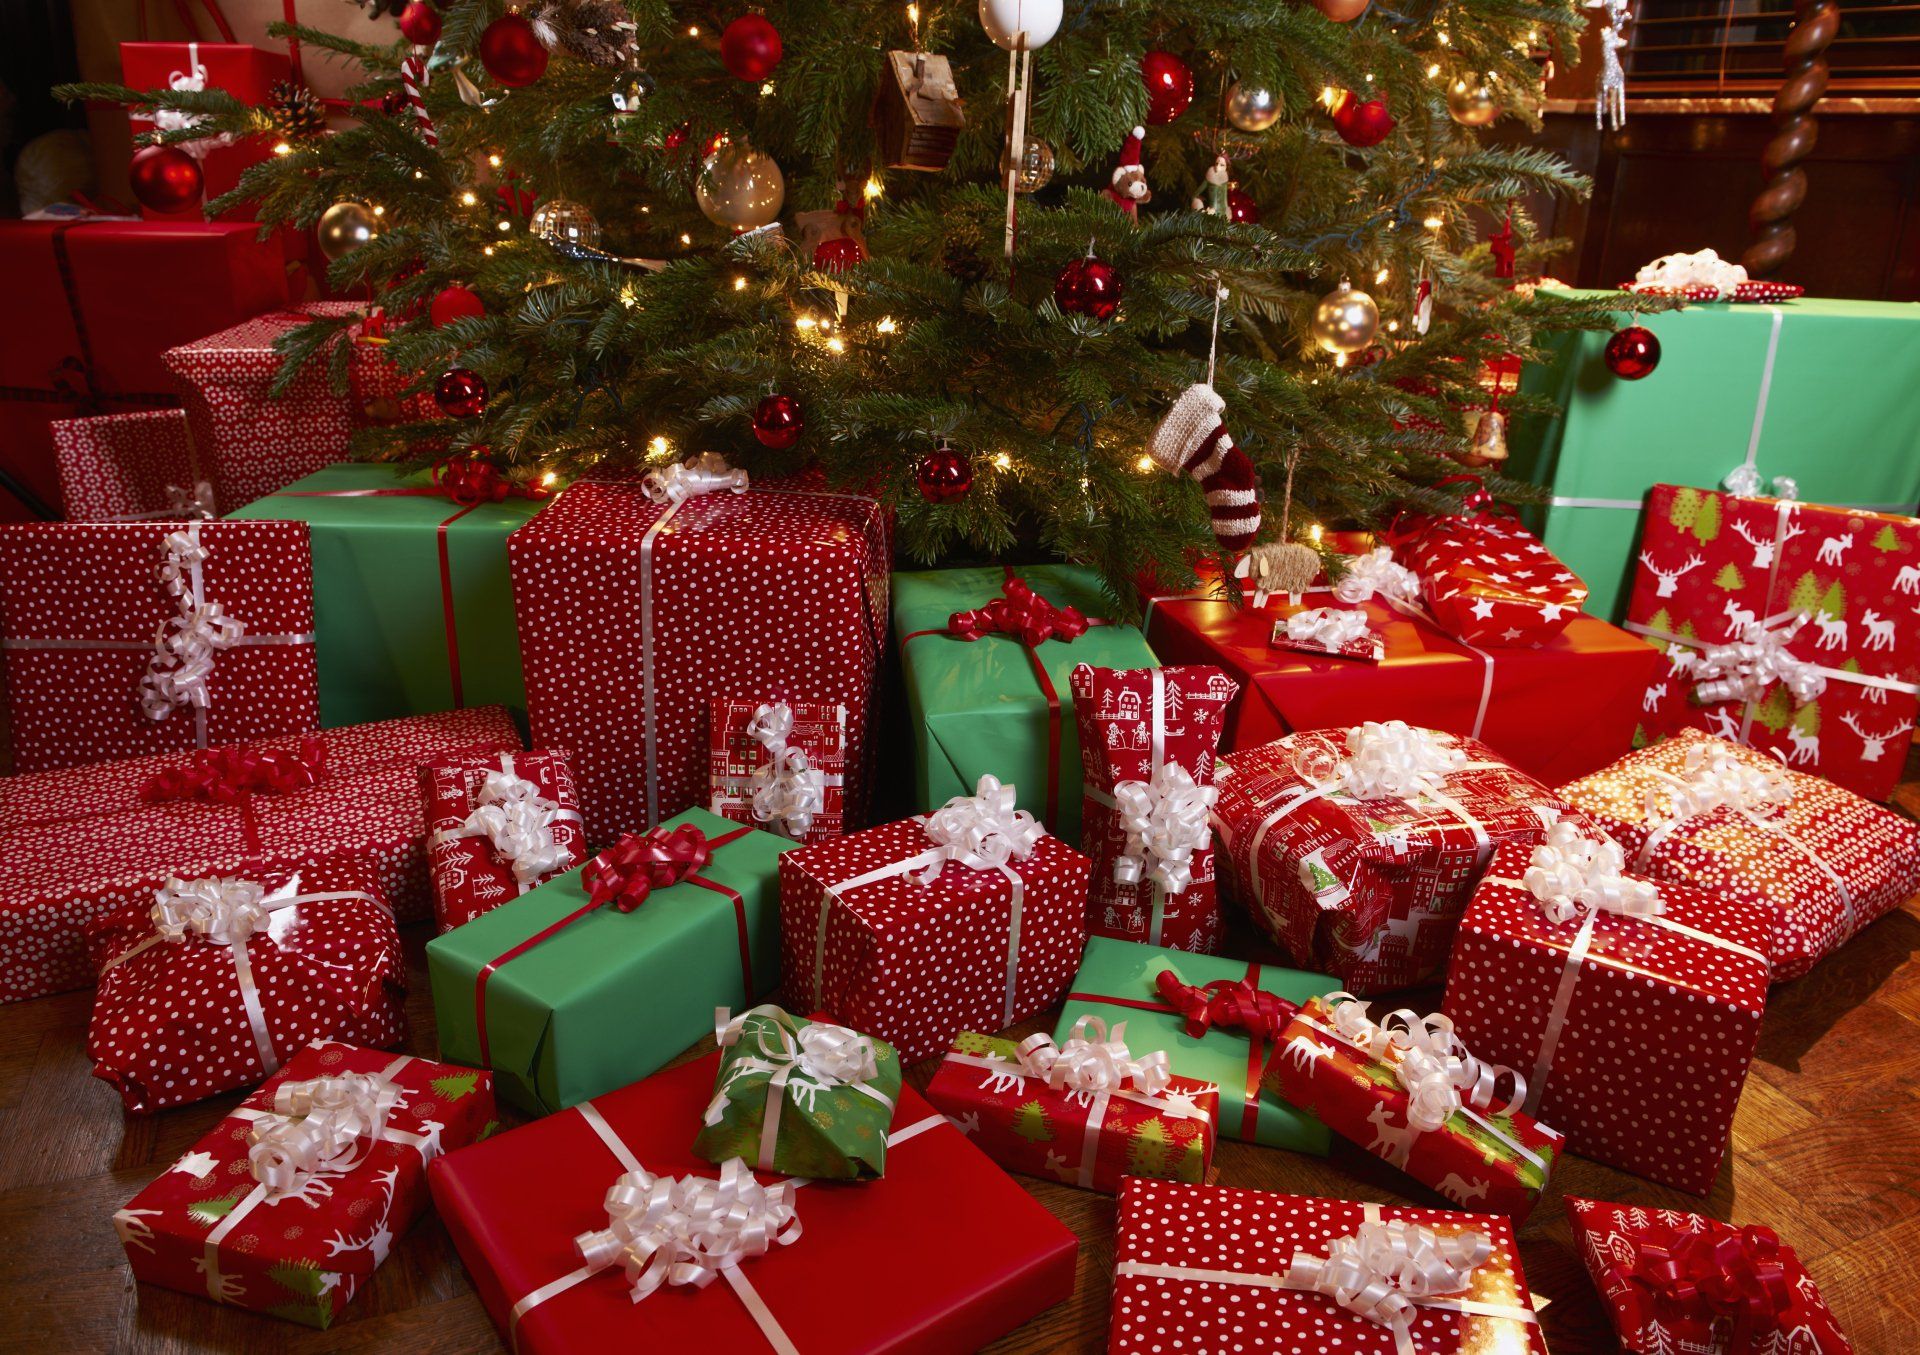 a Christmas tree is surrounded by electronics presents wrapped in red and green